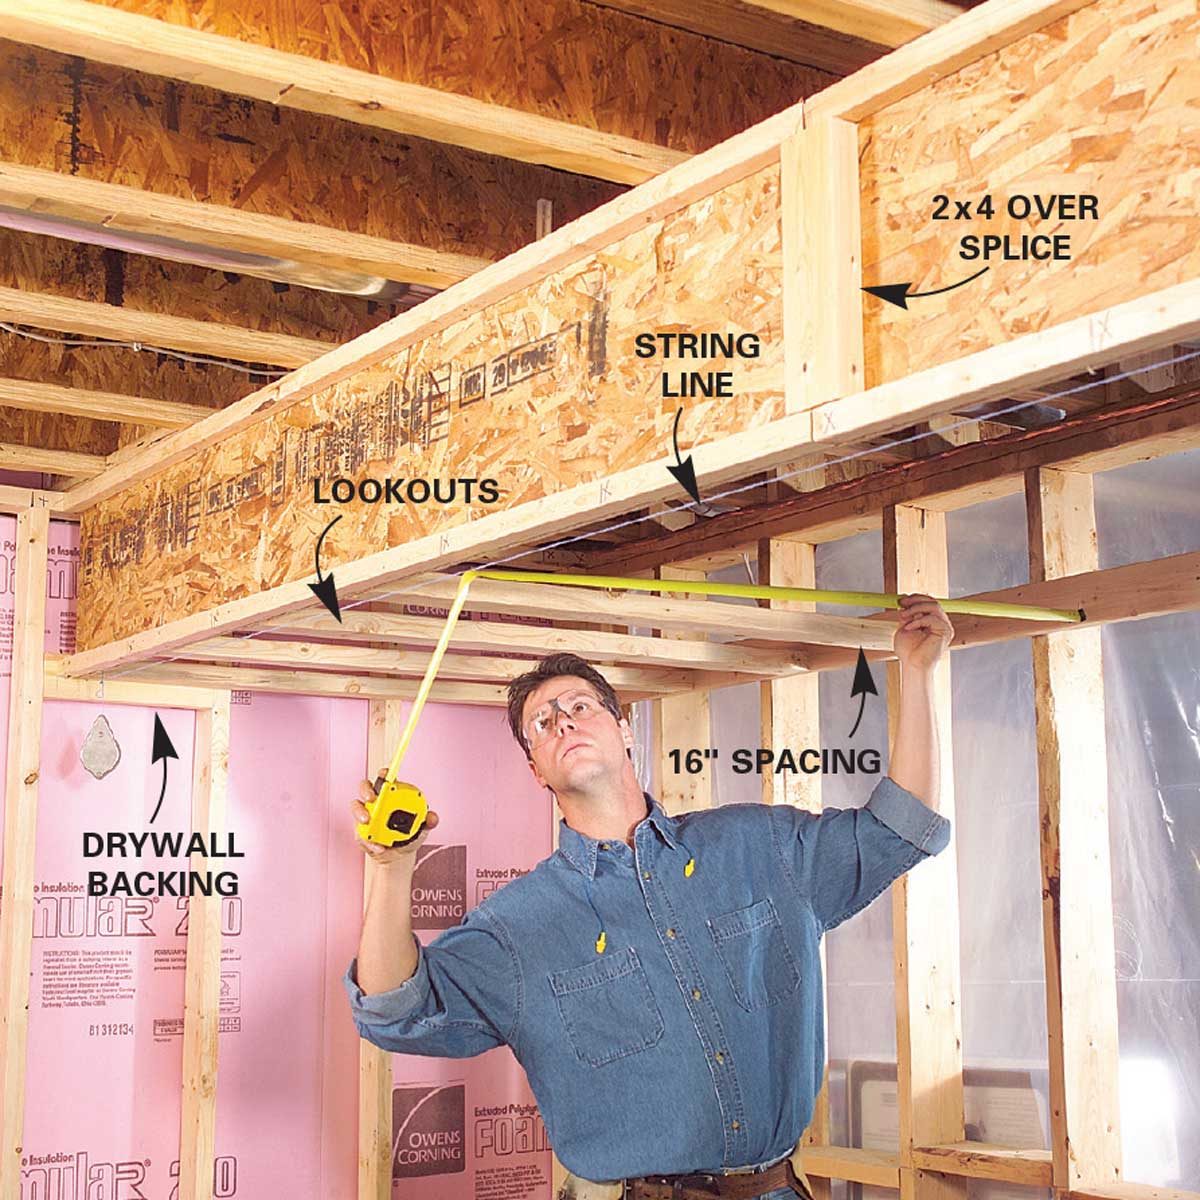 Basement Finishing How To Finish Frame And Insulate A Basement